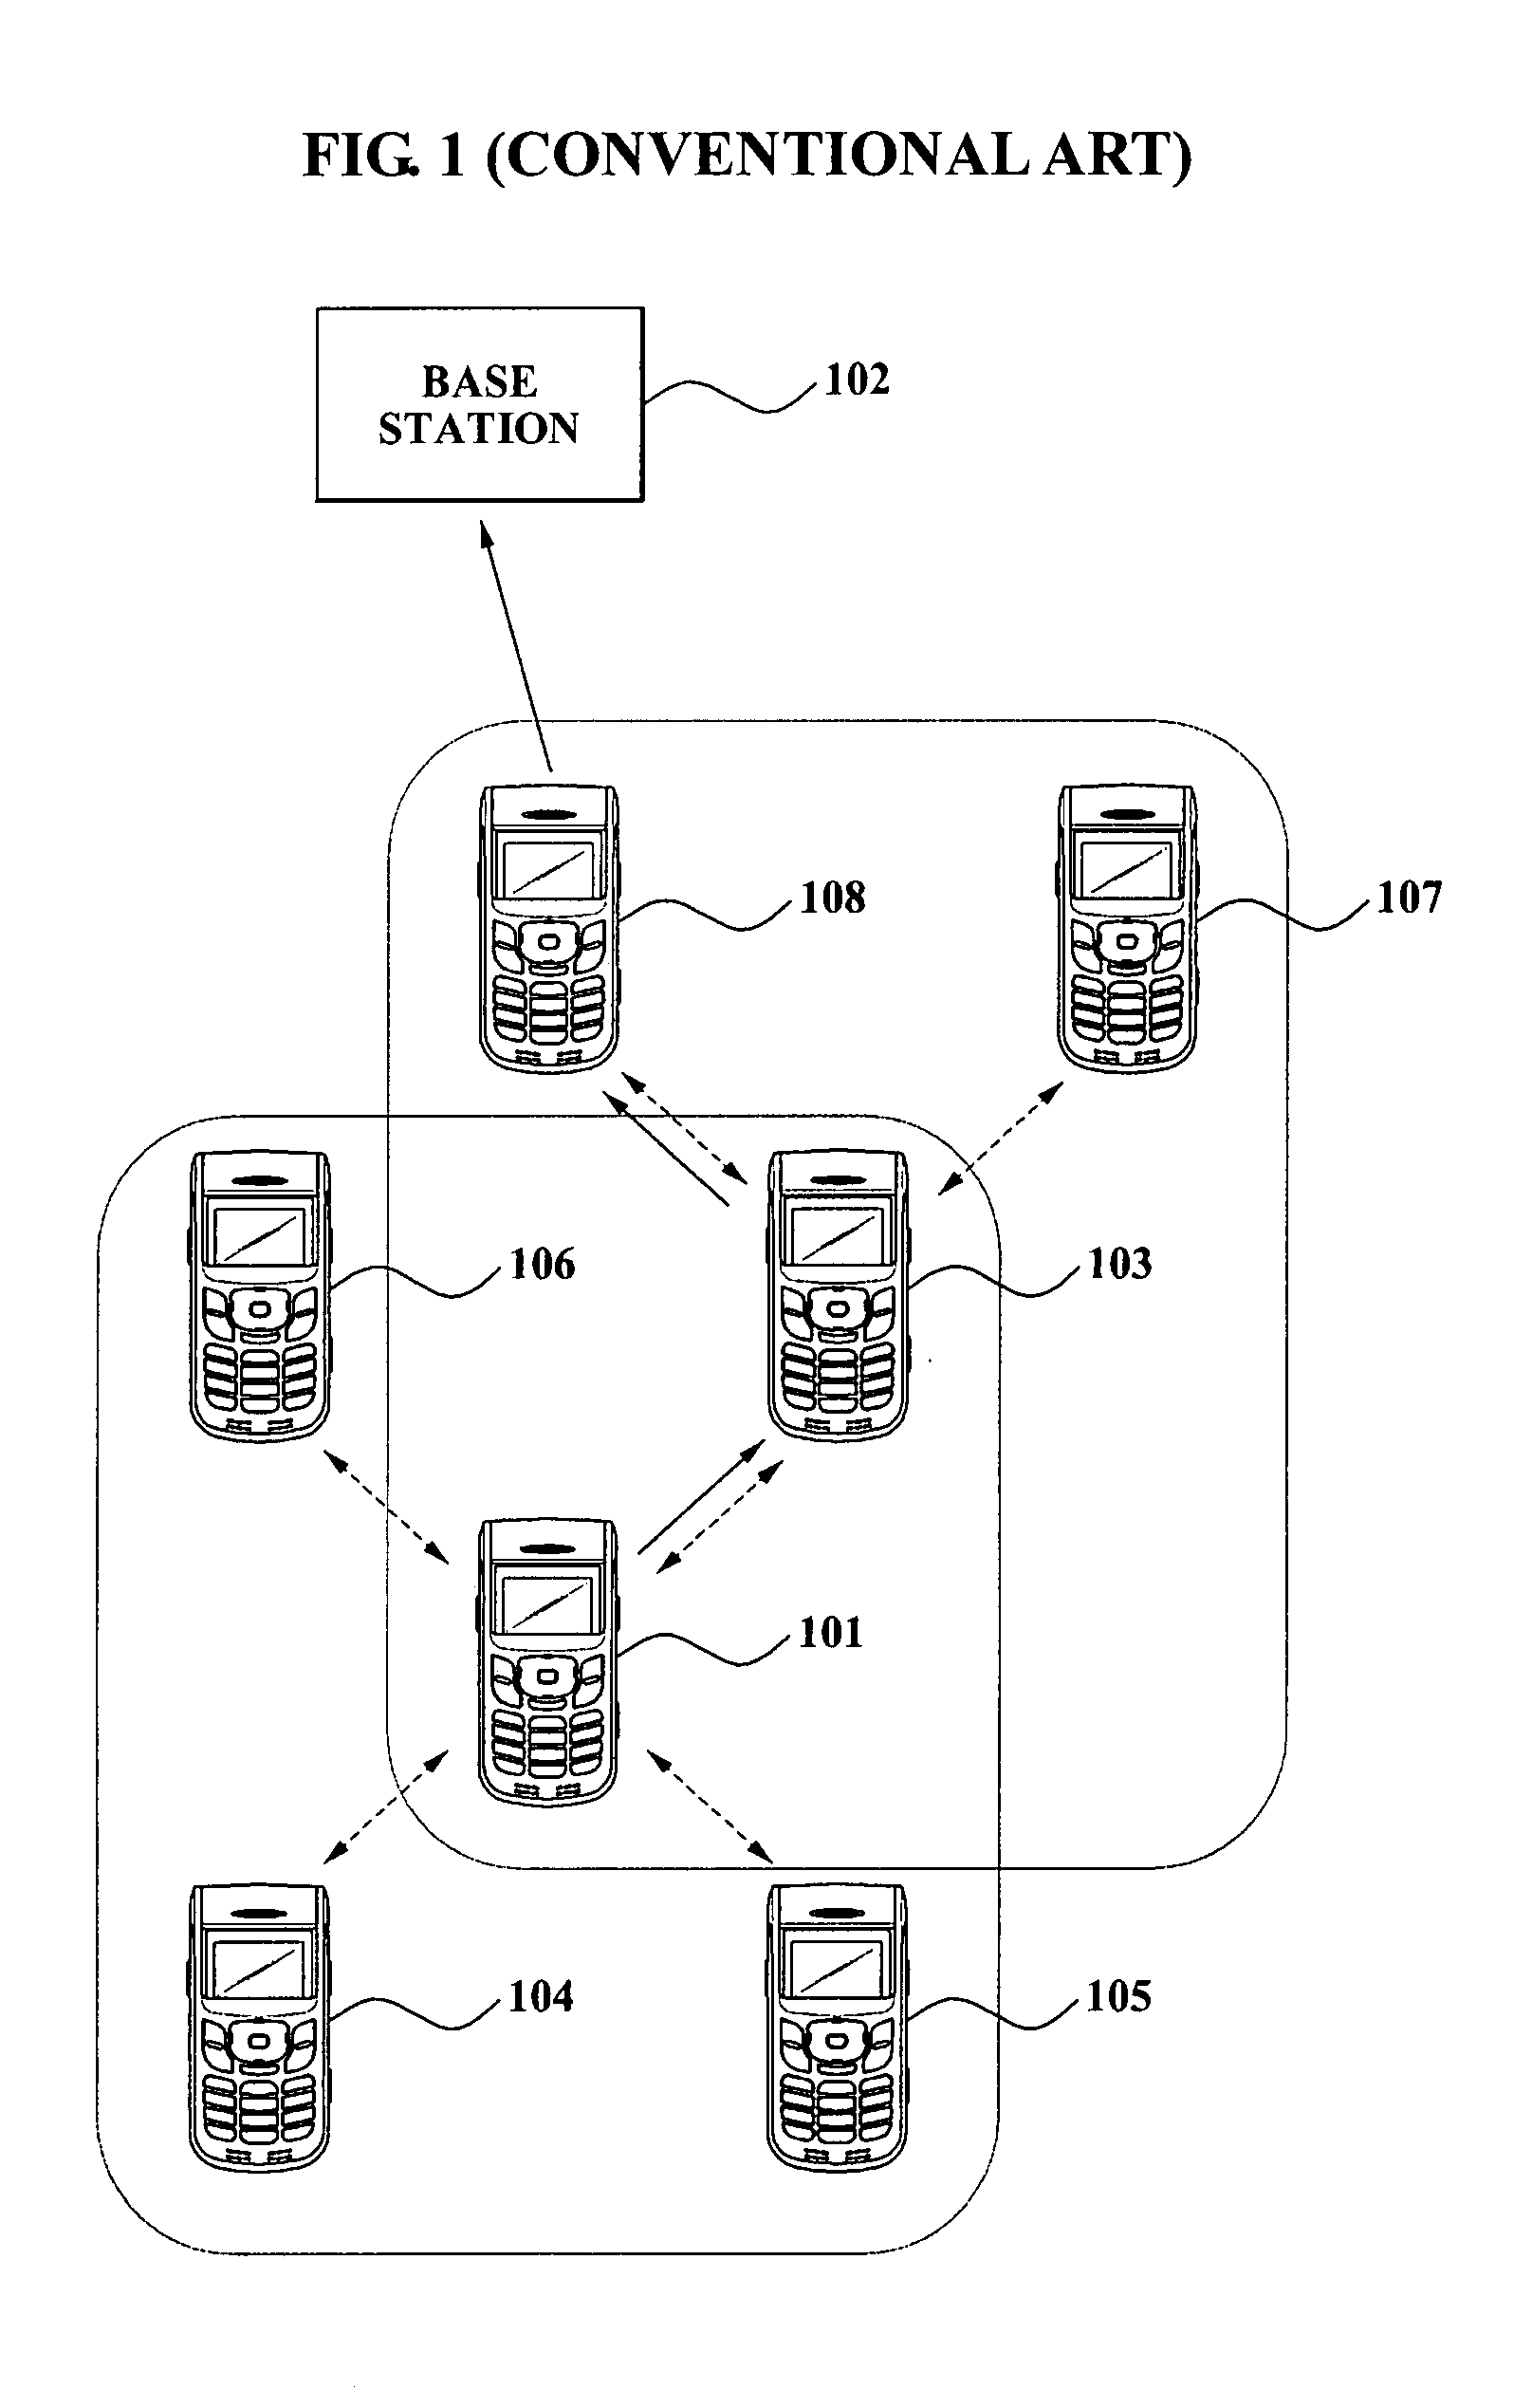 Routing apparatus and method for multi-hop cellular systems